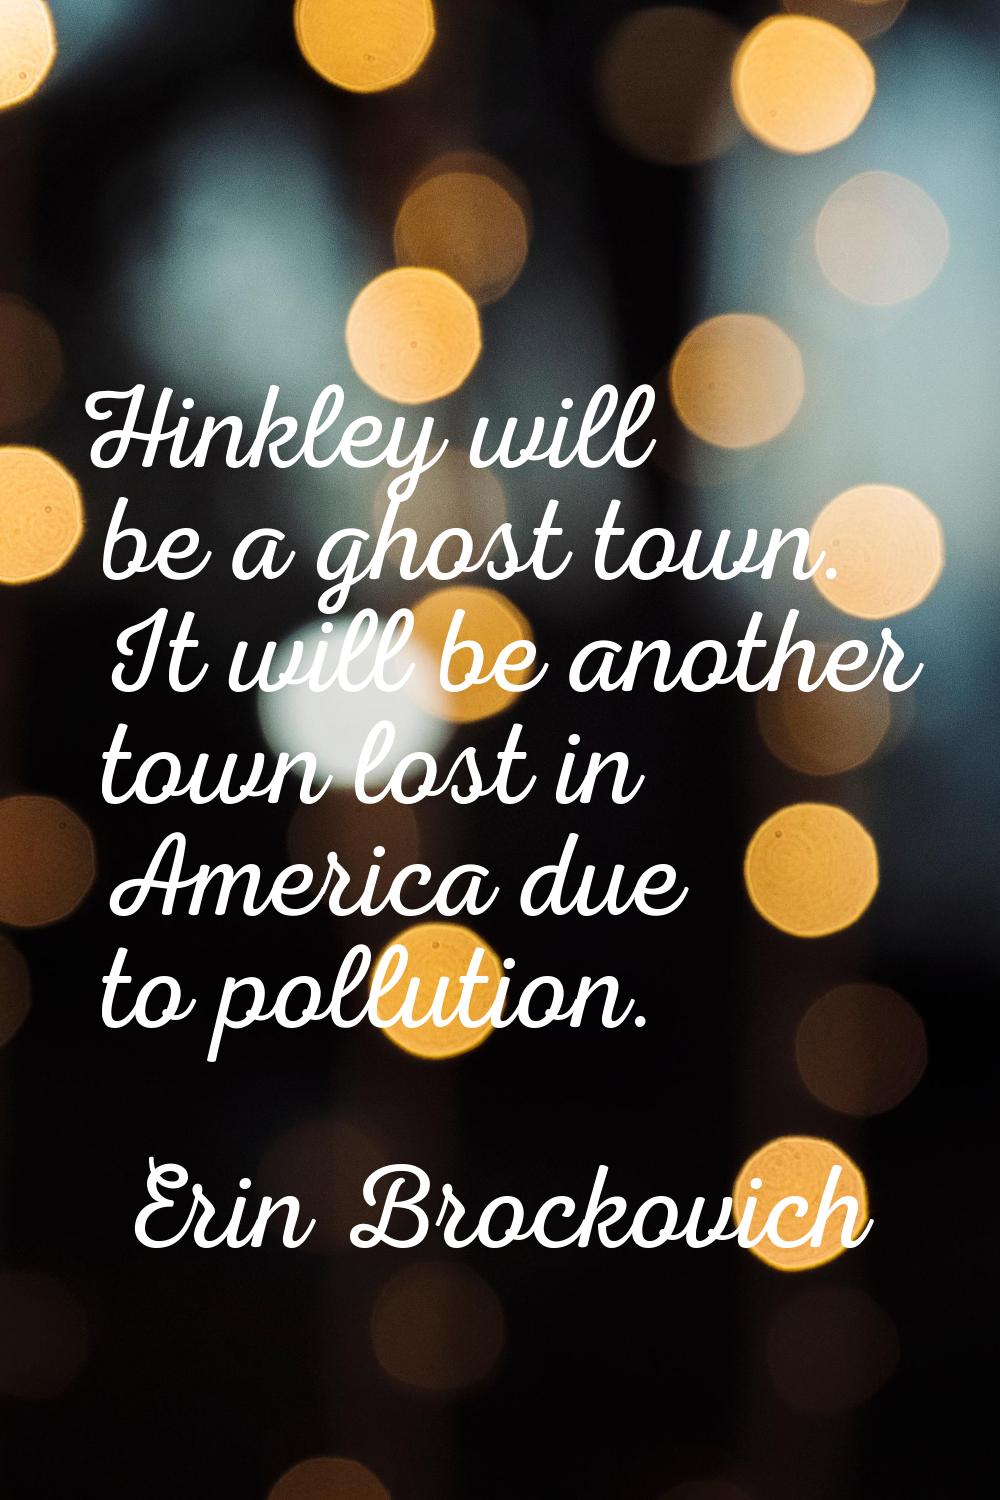 Hinkley will be a ghost town. It will be another town lost in America due to pollution.